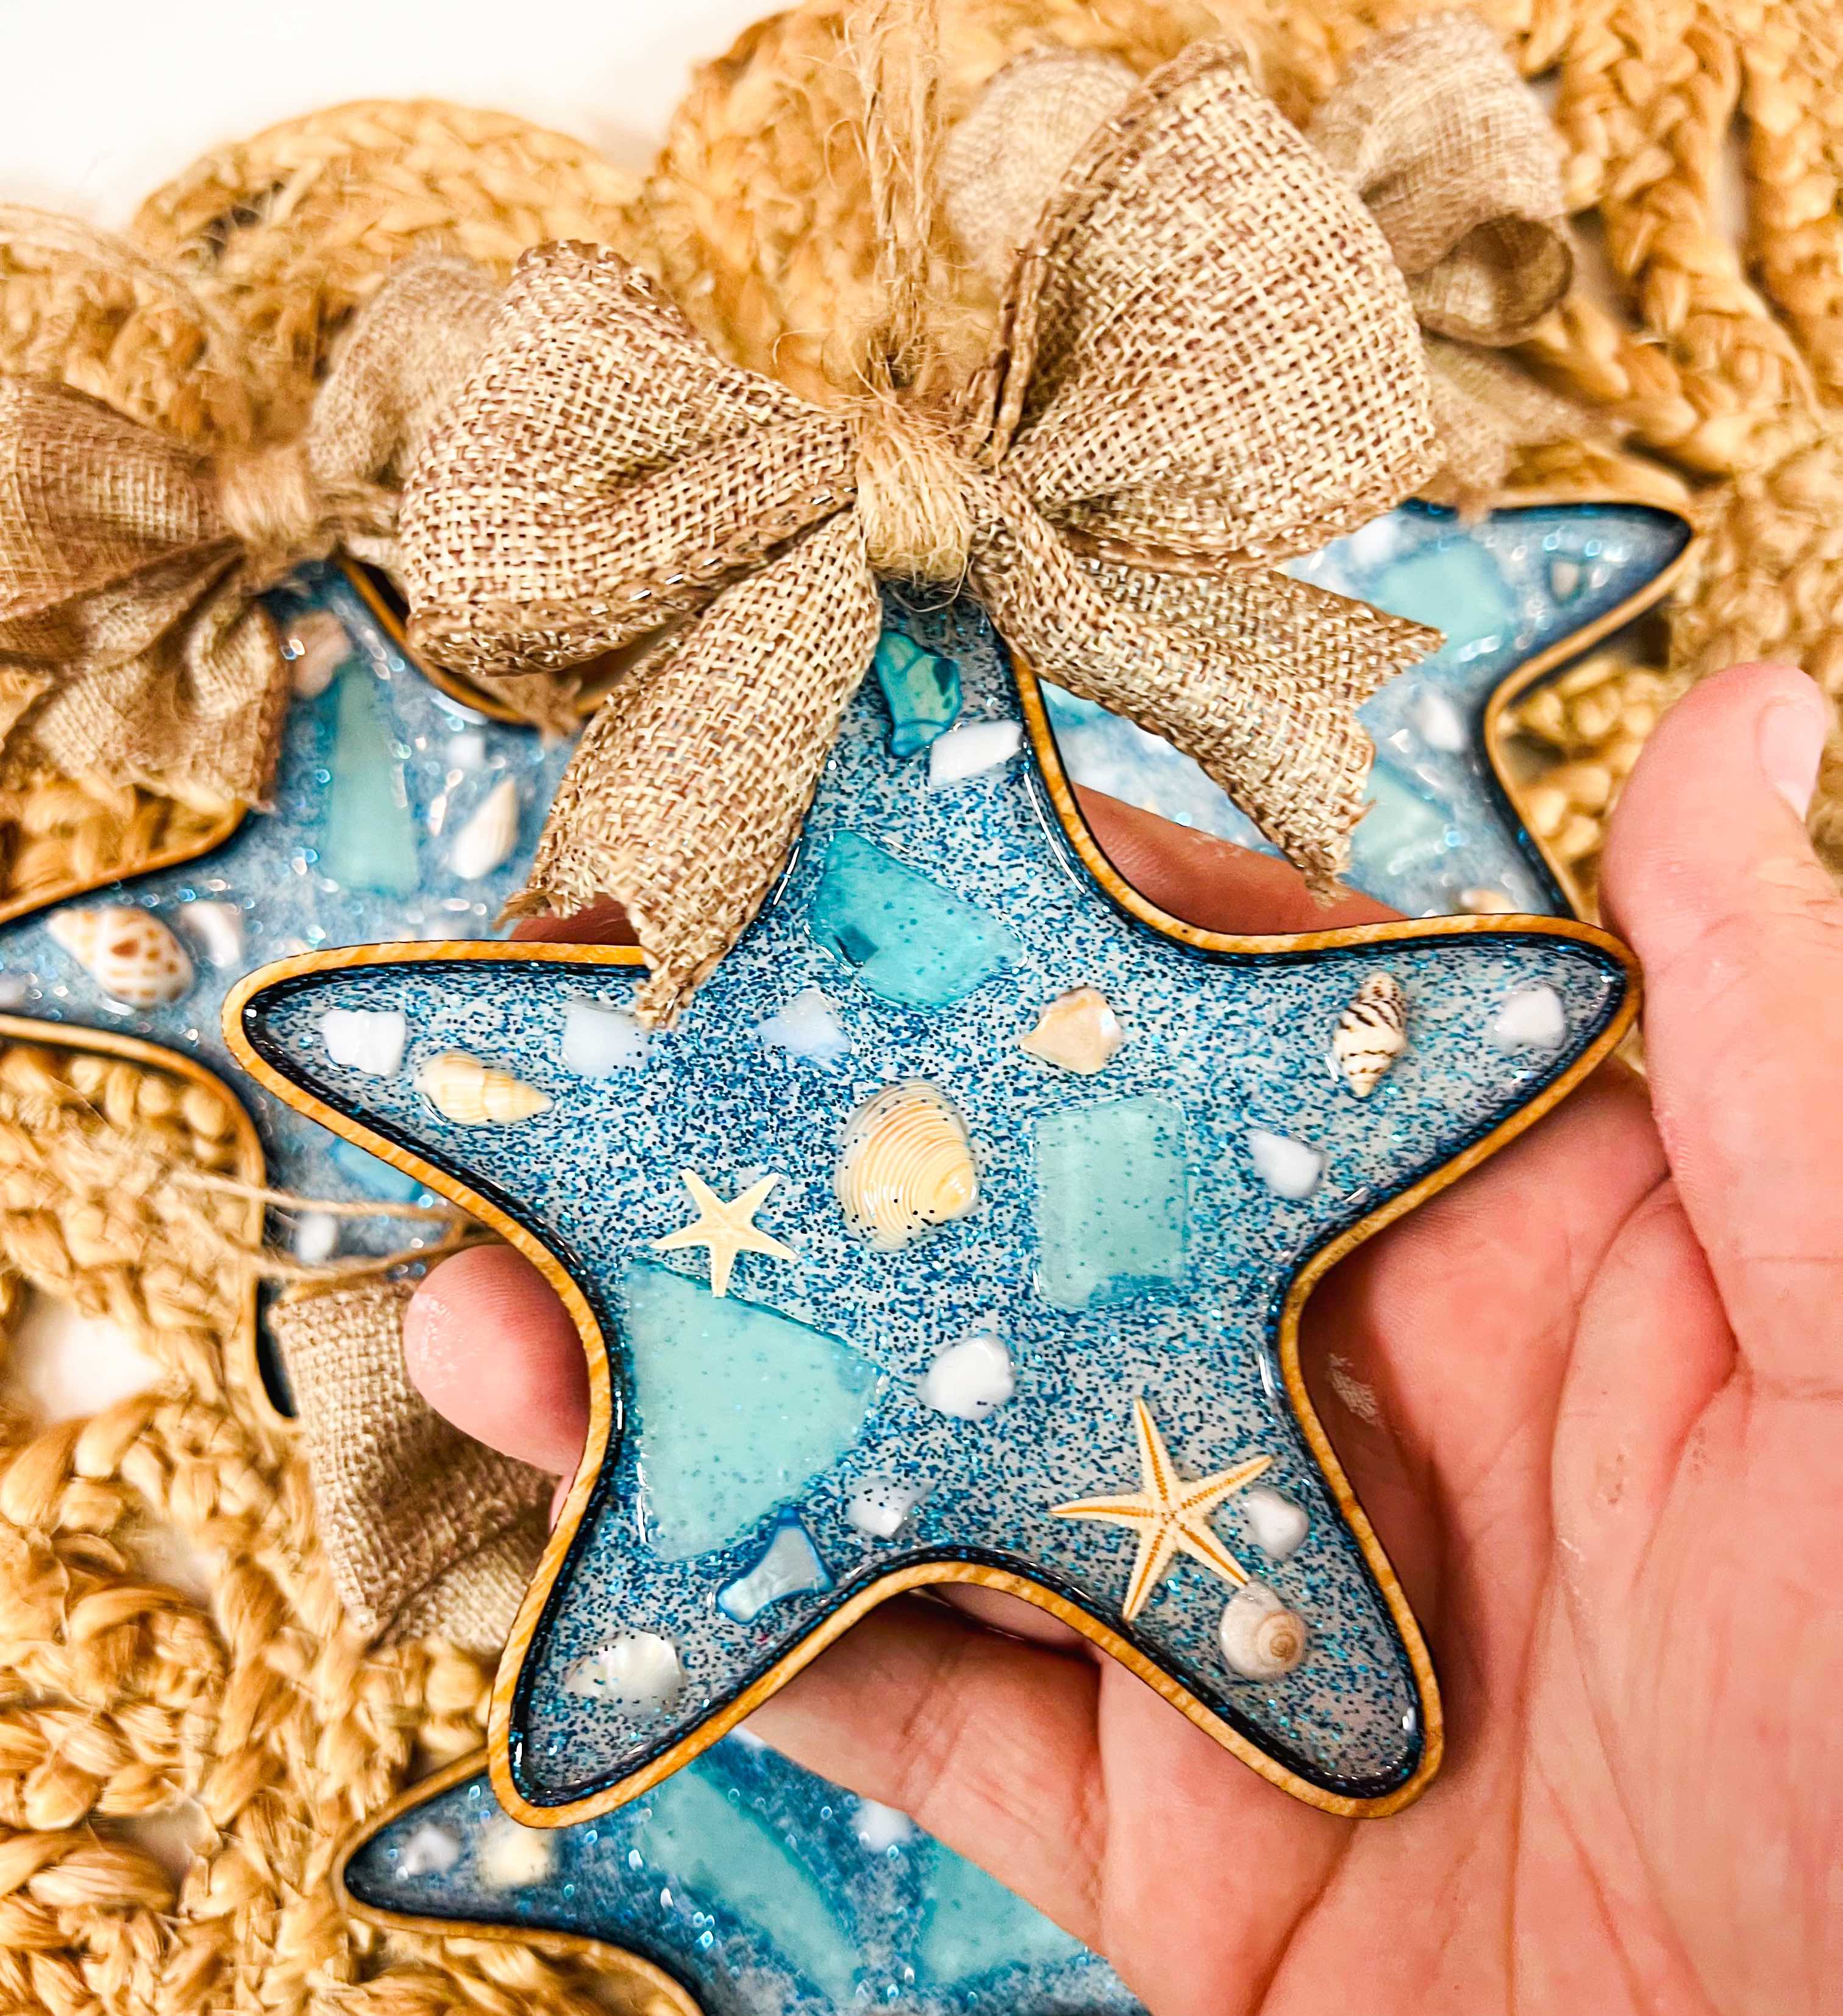 RESIN POURED STARFISH ORNAMENTS (SET OF 4 ) | DIY